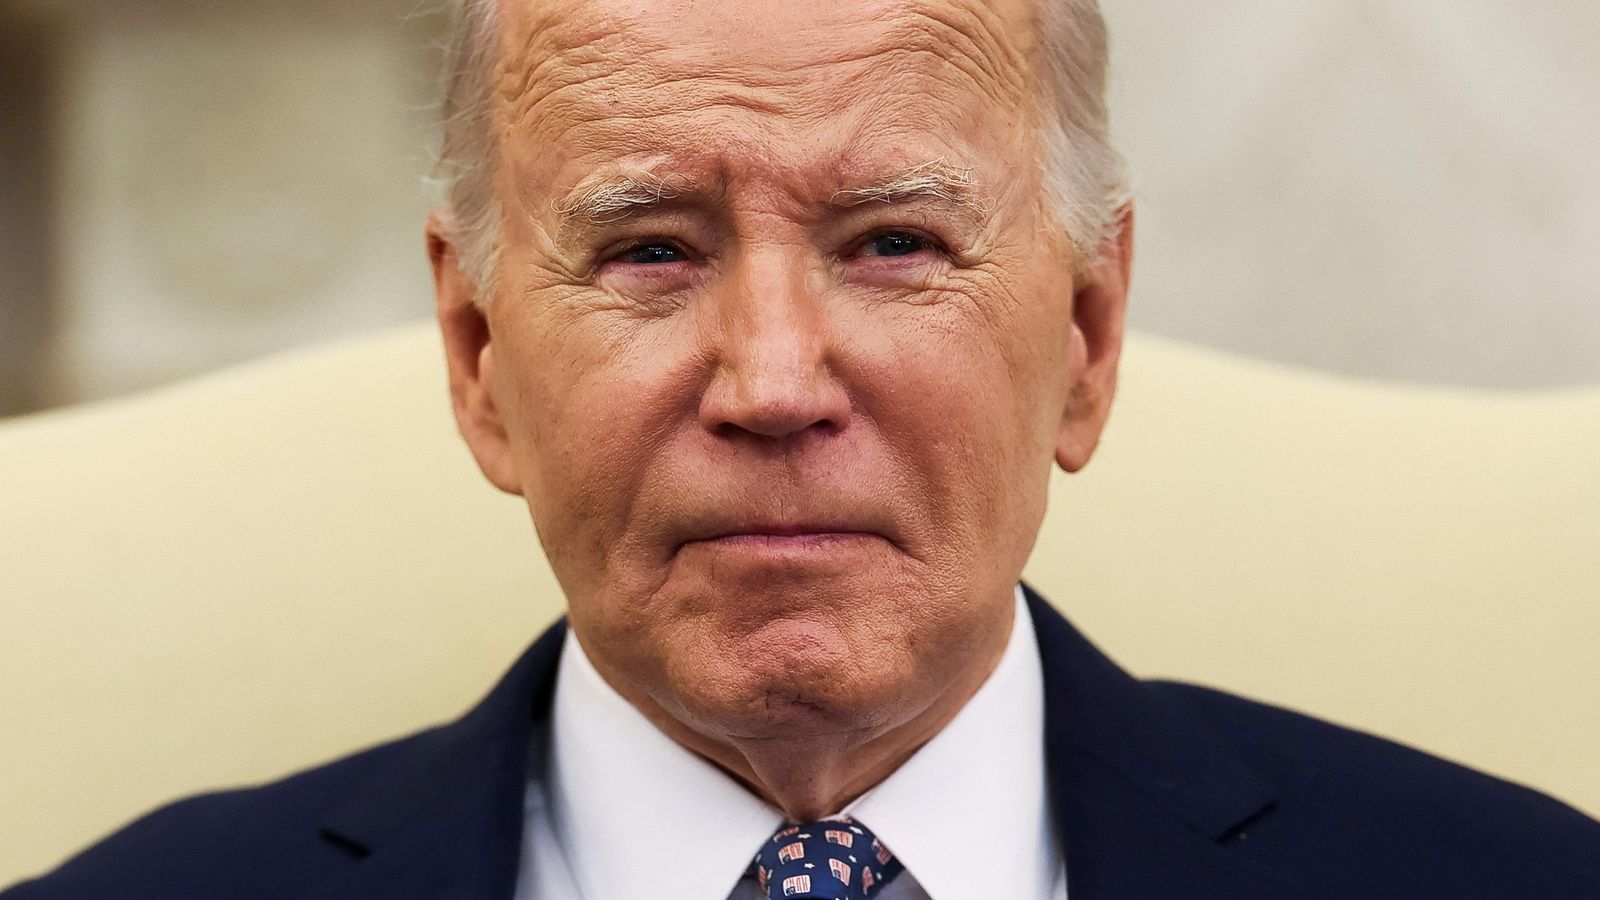 It's the inflation, stupid: Why a 'vibecession' is hurting Biden - despite an economy which is the envy of Europe